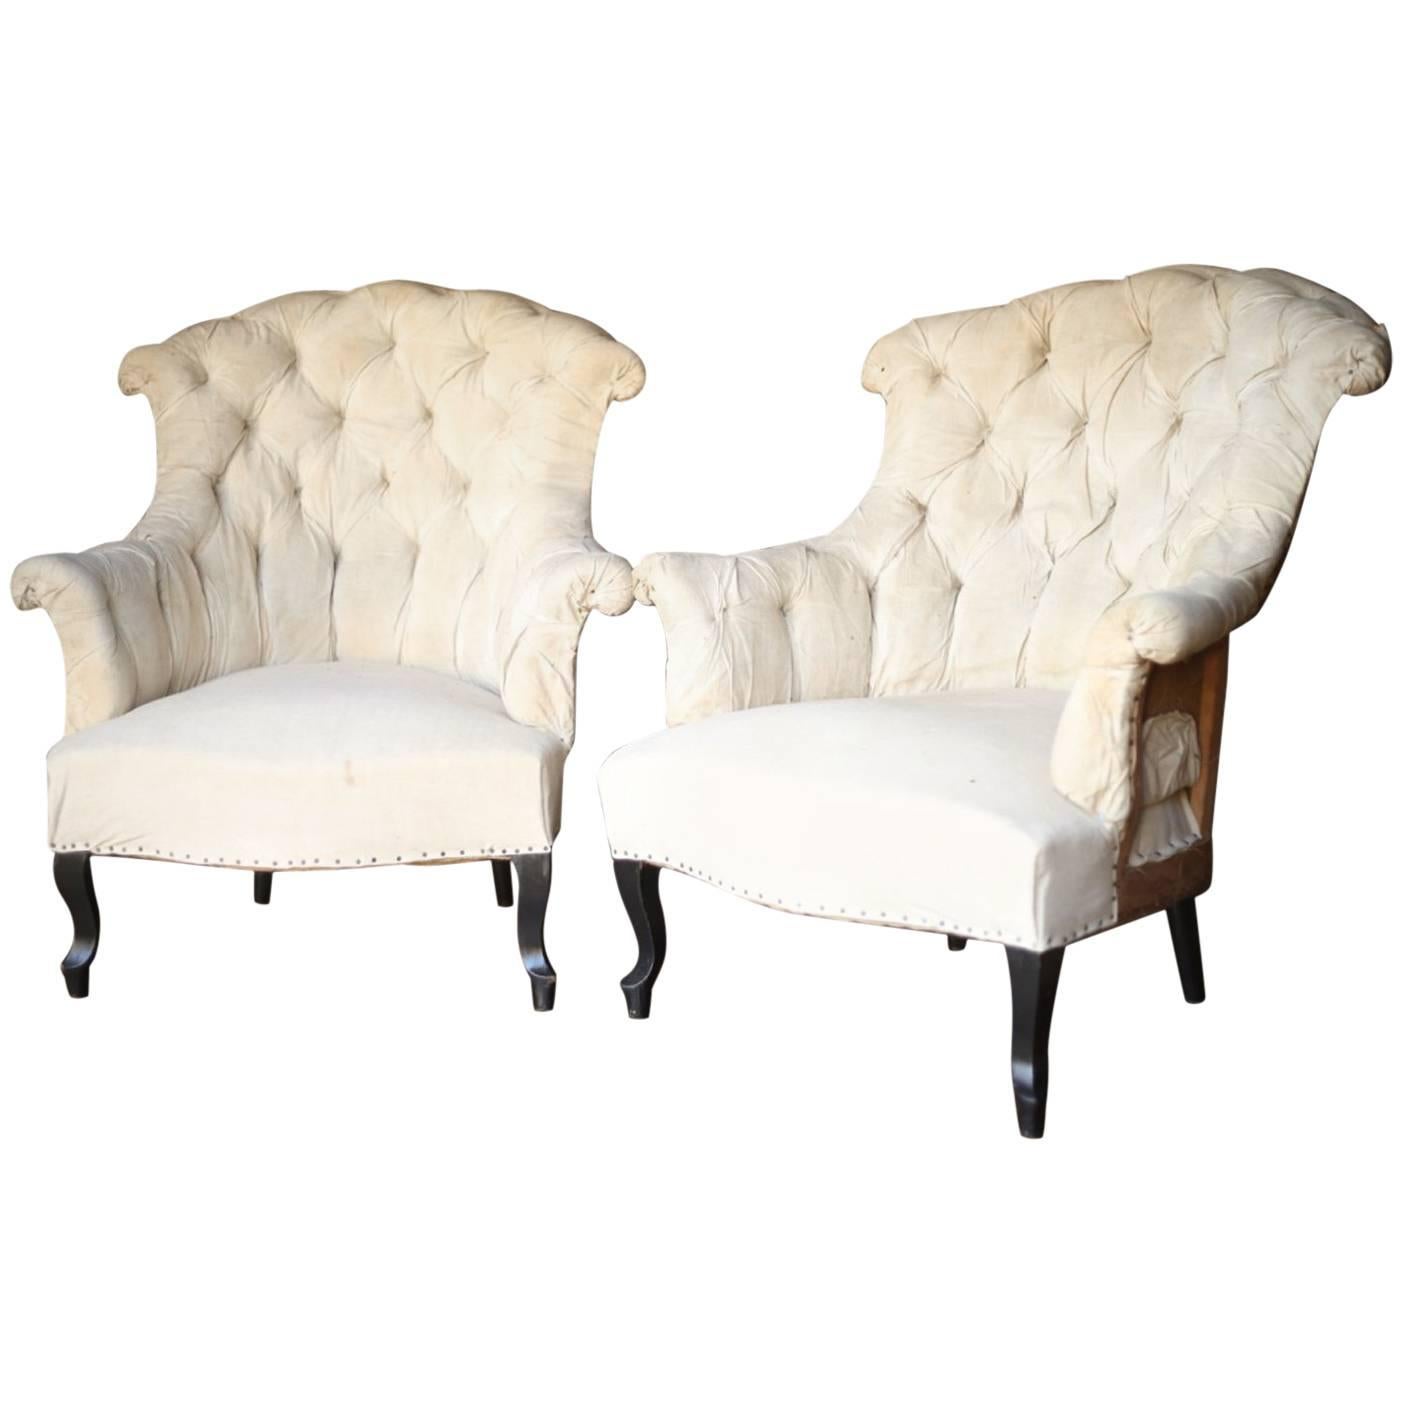 Pair of 19th Century Napoleon III High Backed Buttoned Armchairs